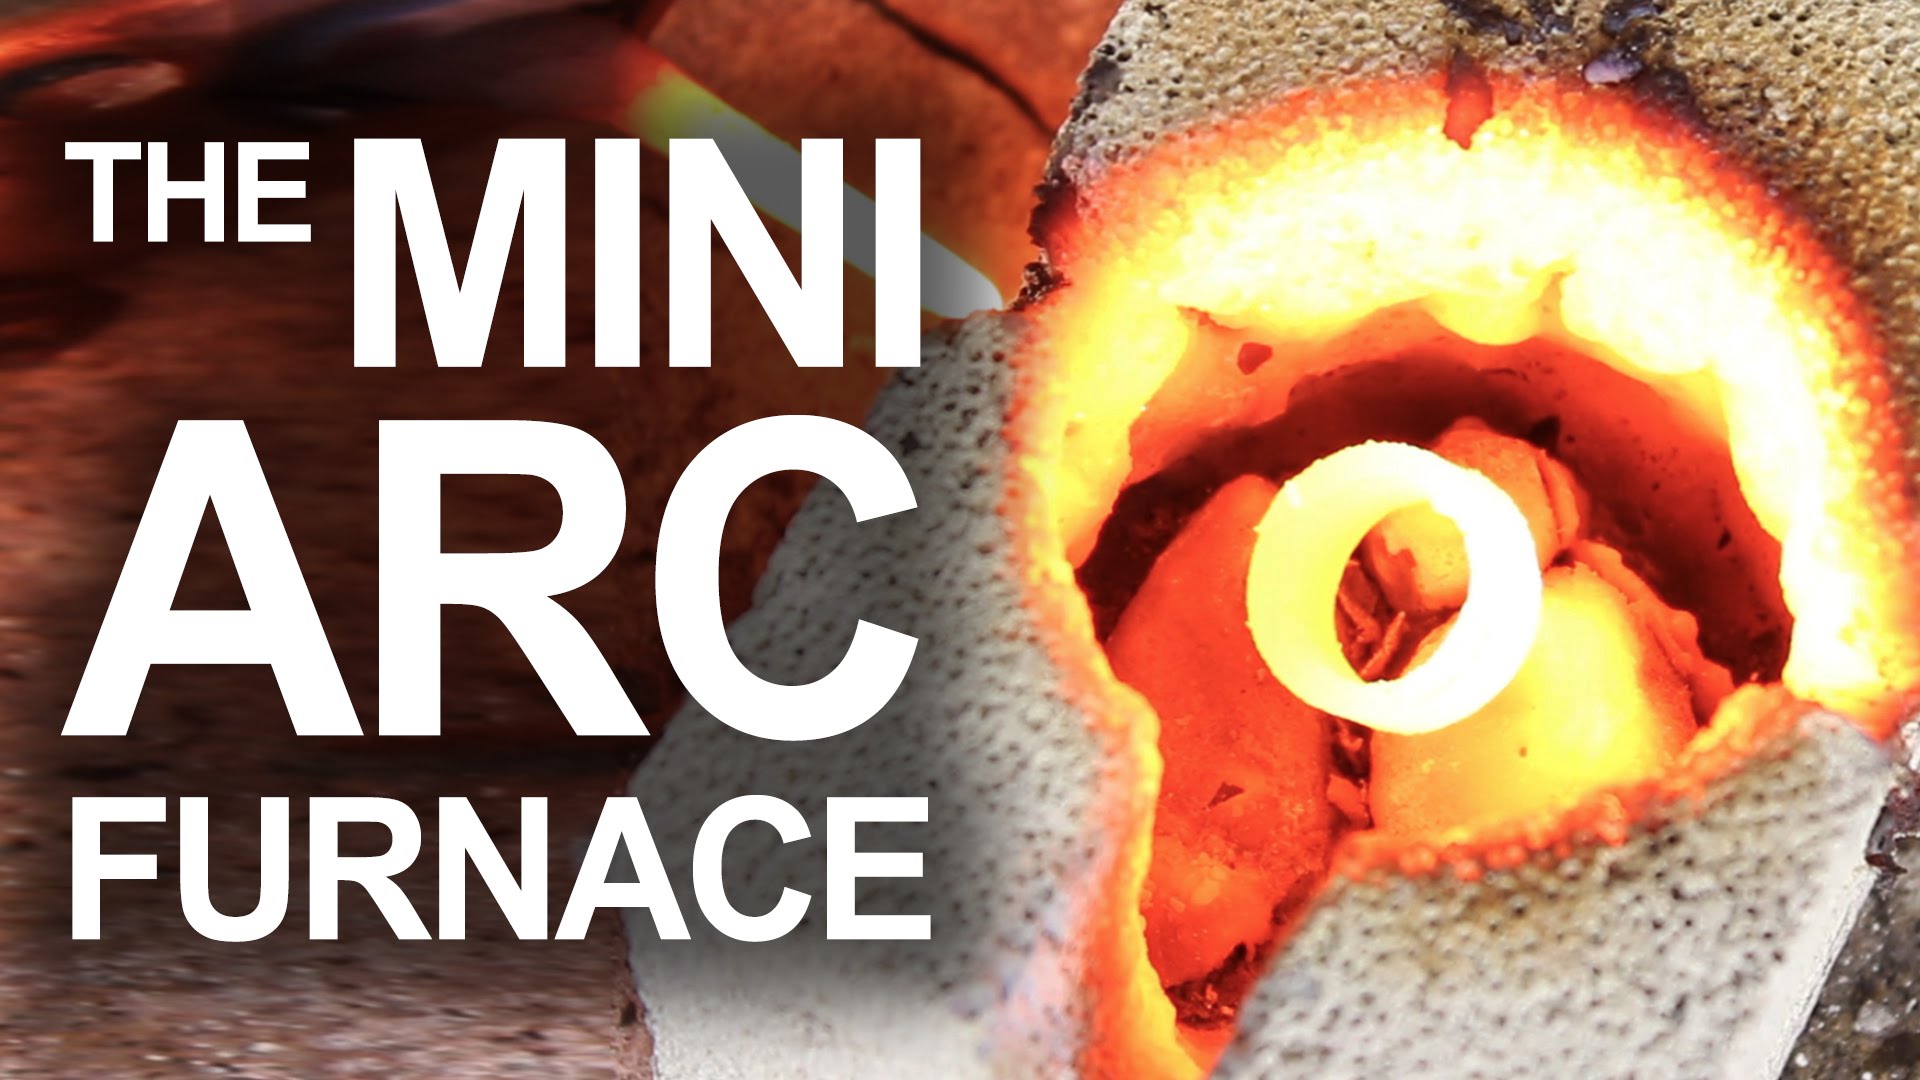 The Power of The Mini Arc Furnace